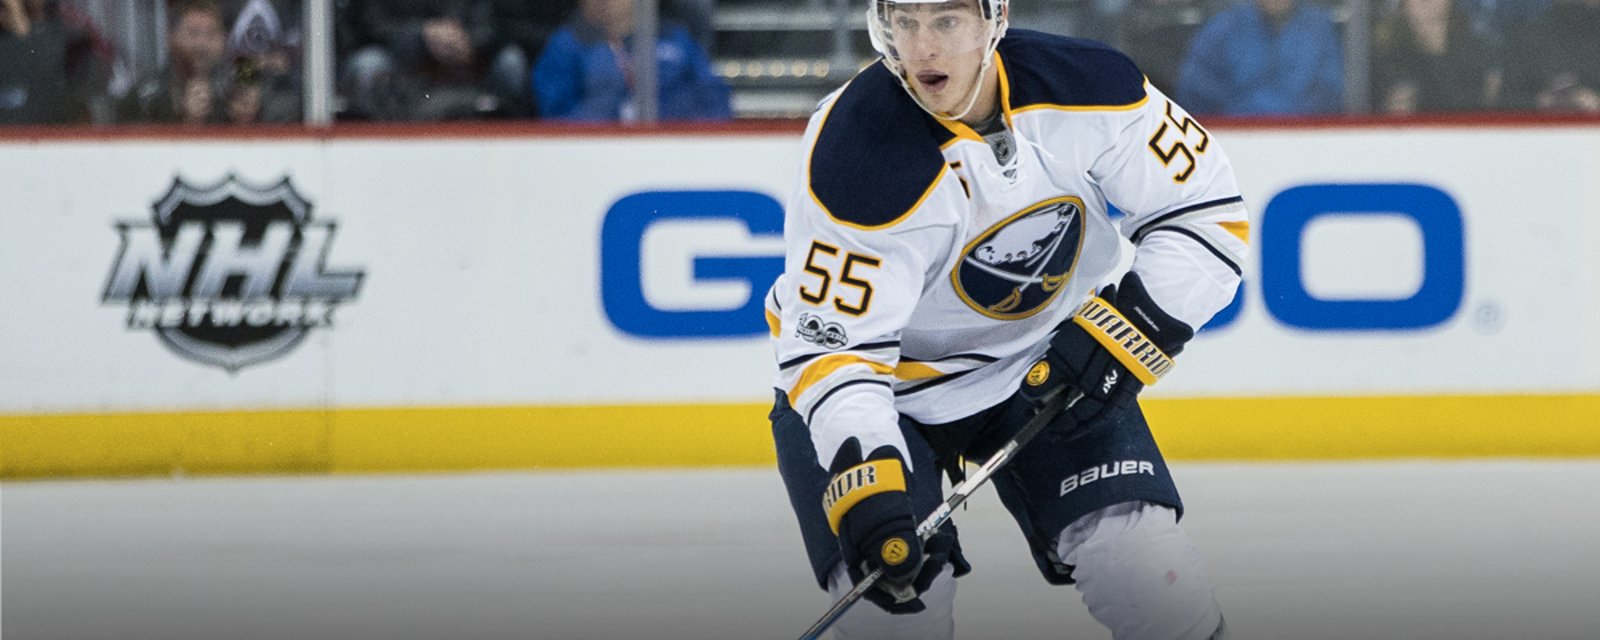 Injury update: Coach issues alarming update for Ristolainen